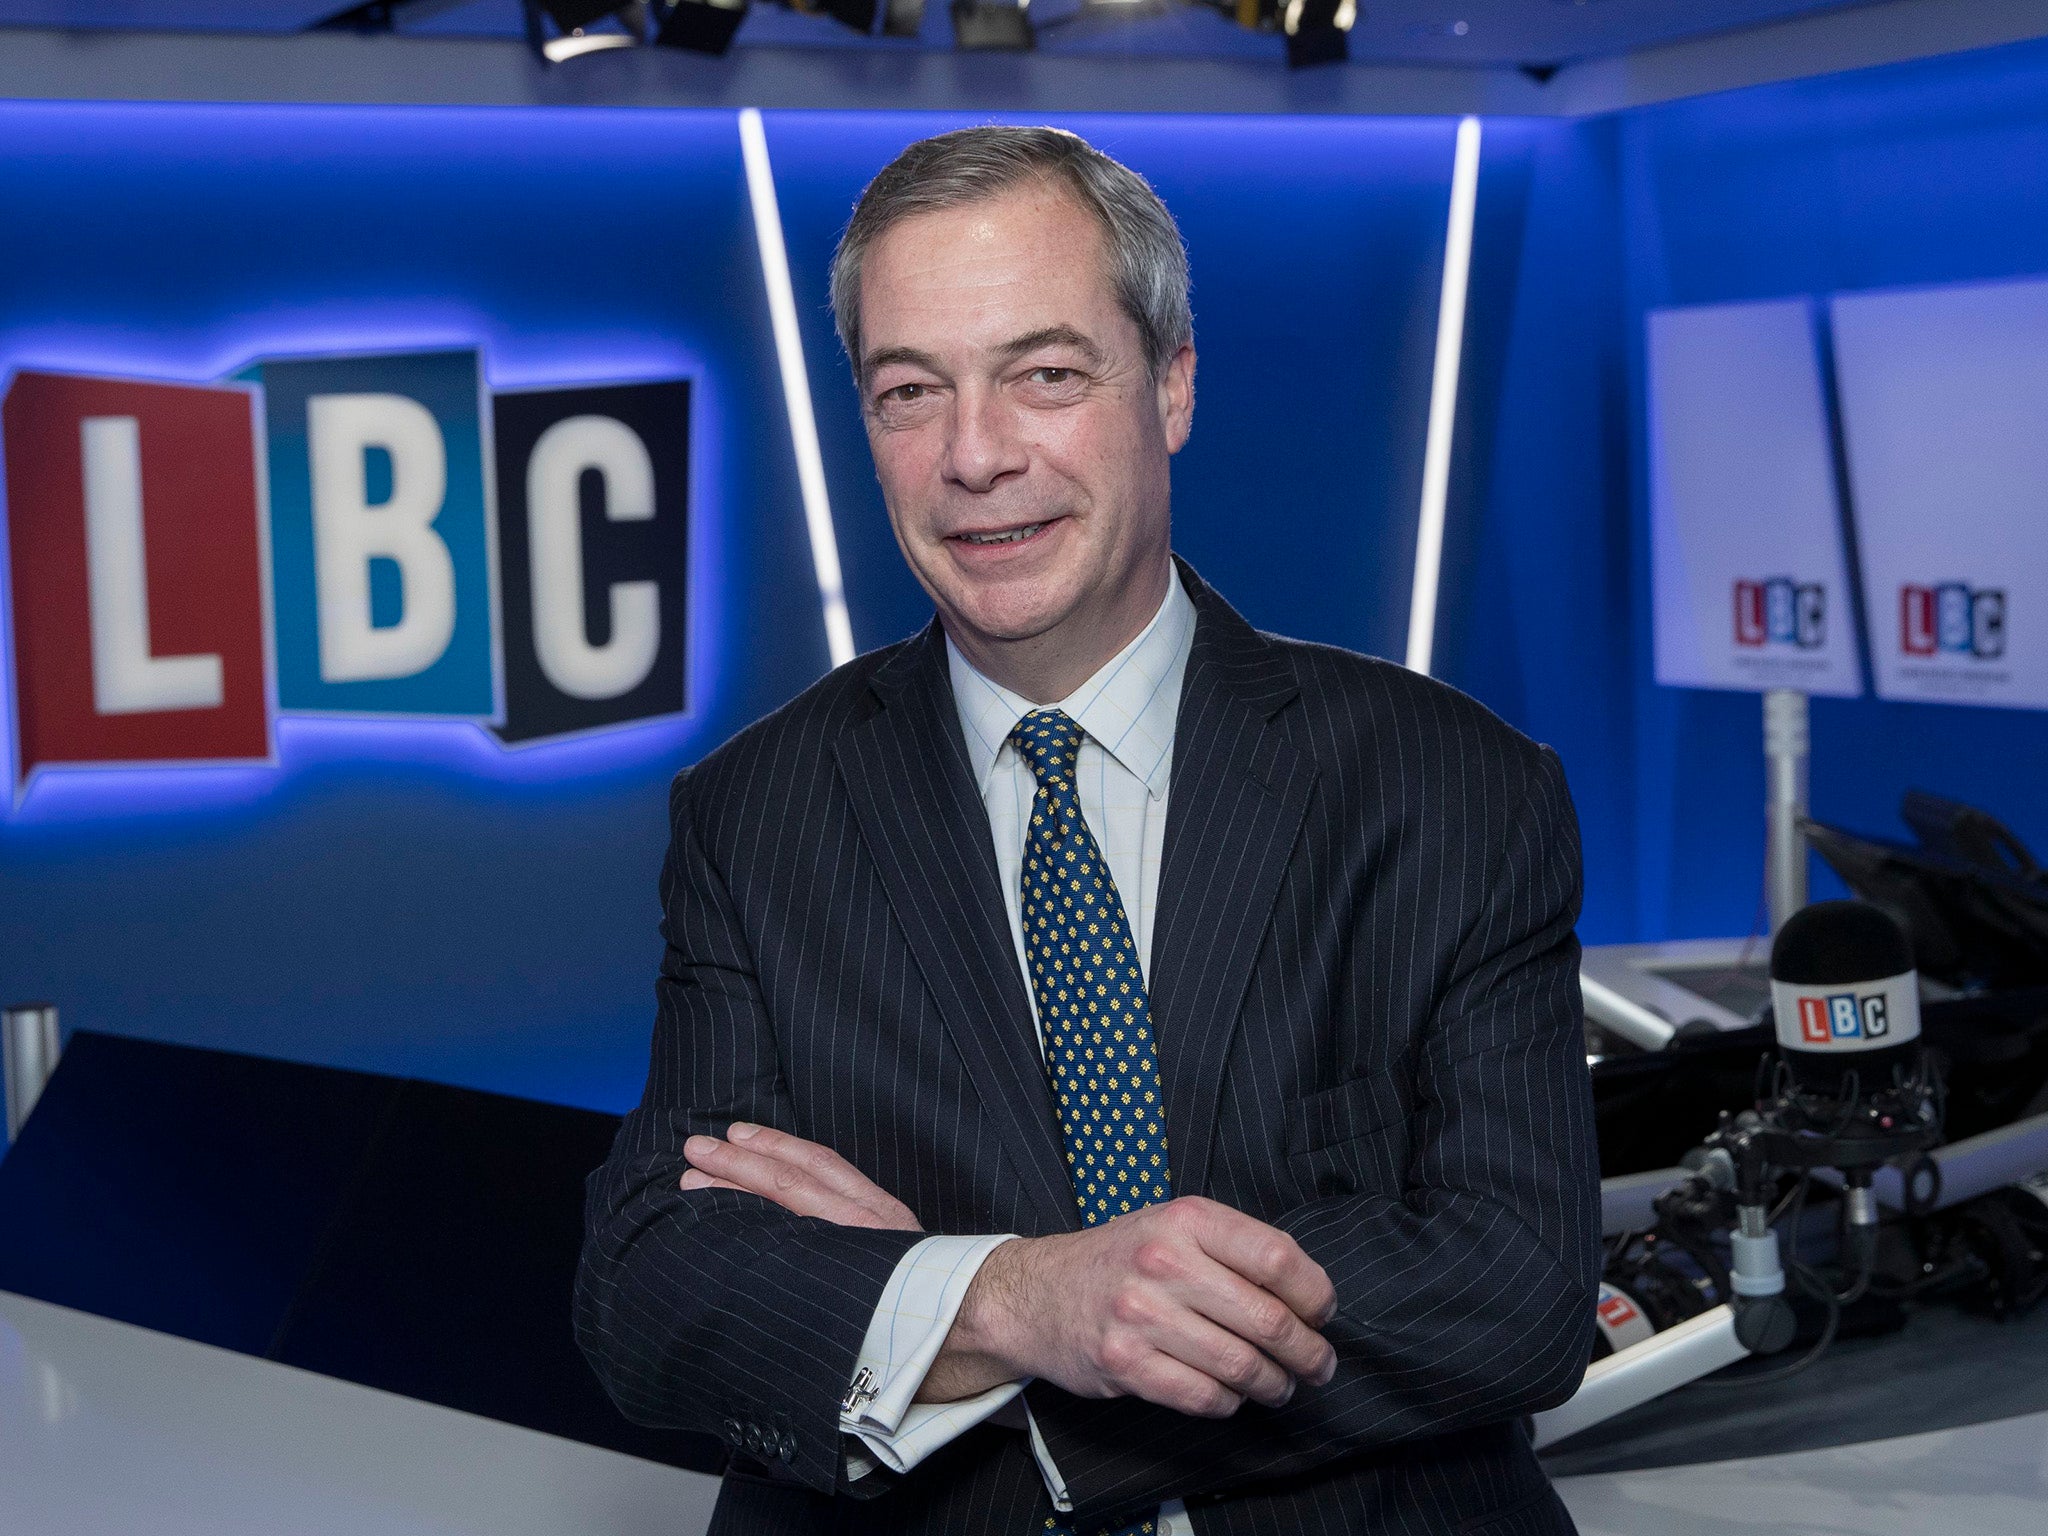 Nigel Farage hosts his first evening show on LBC